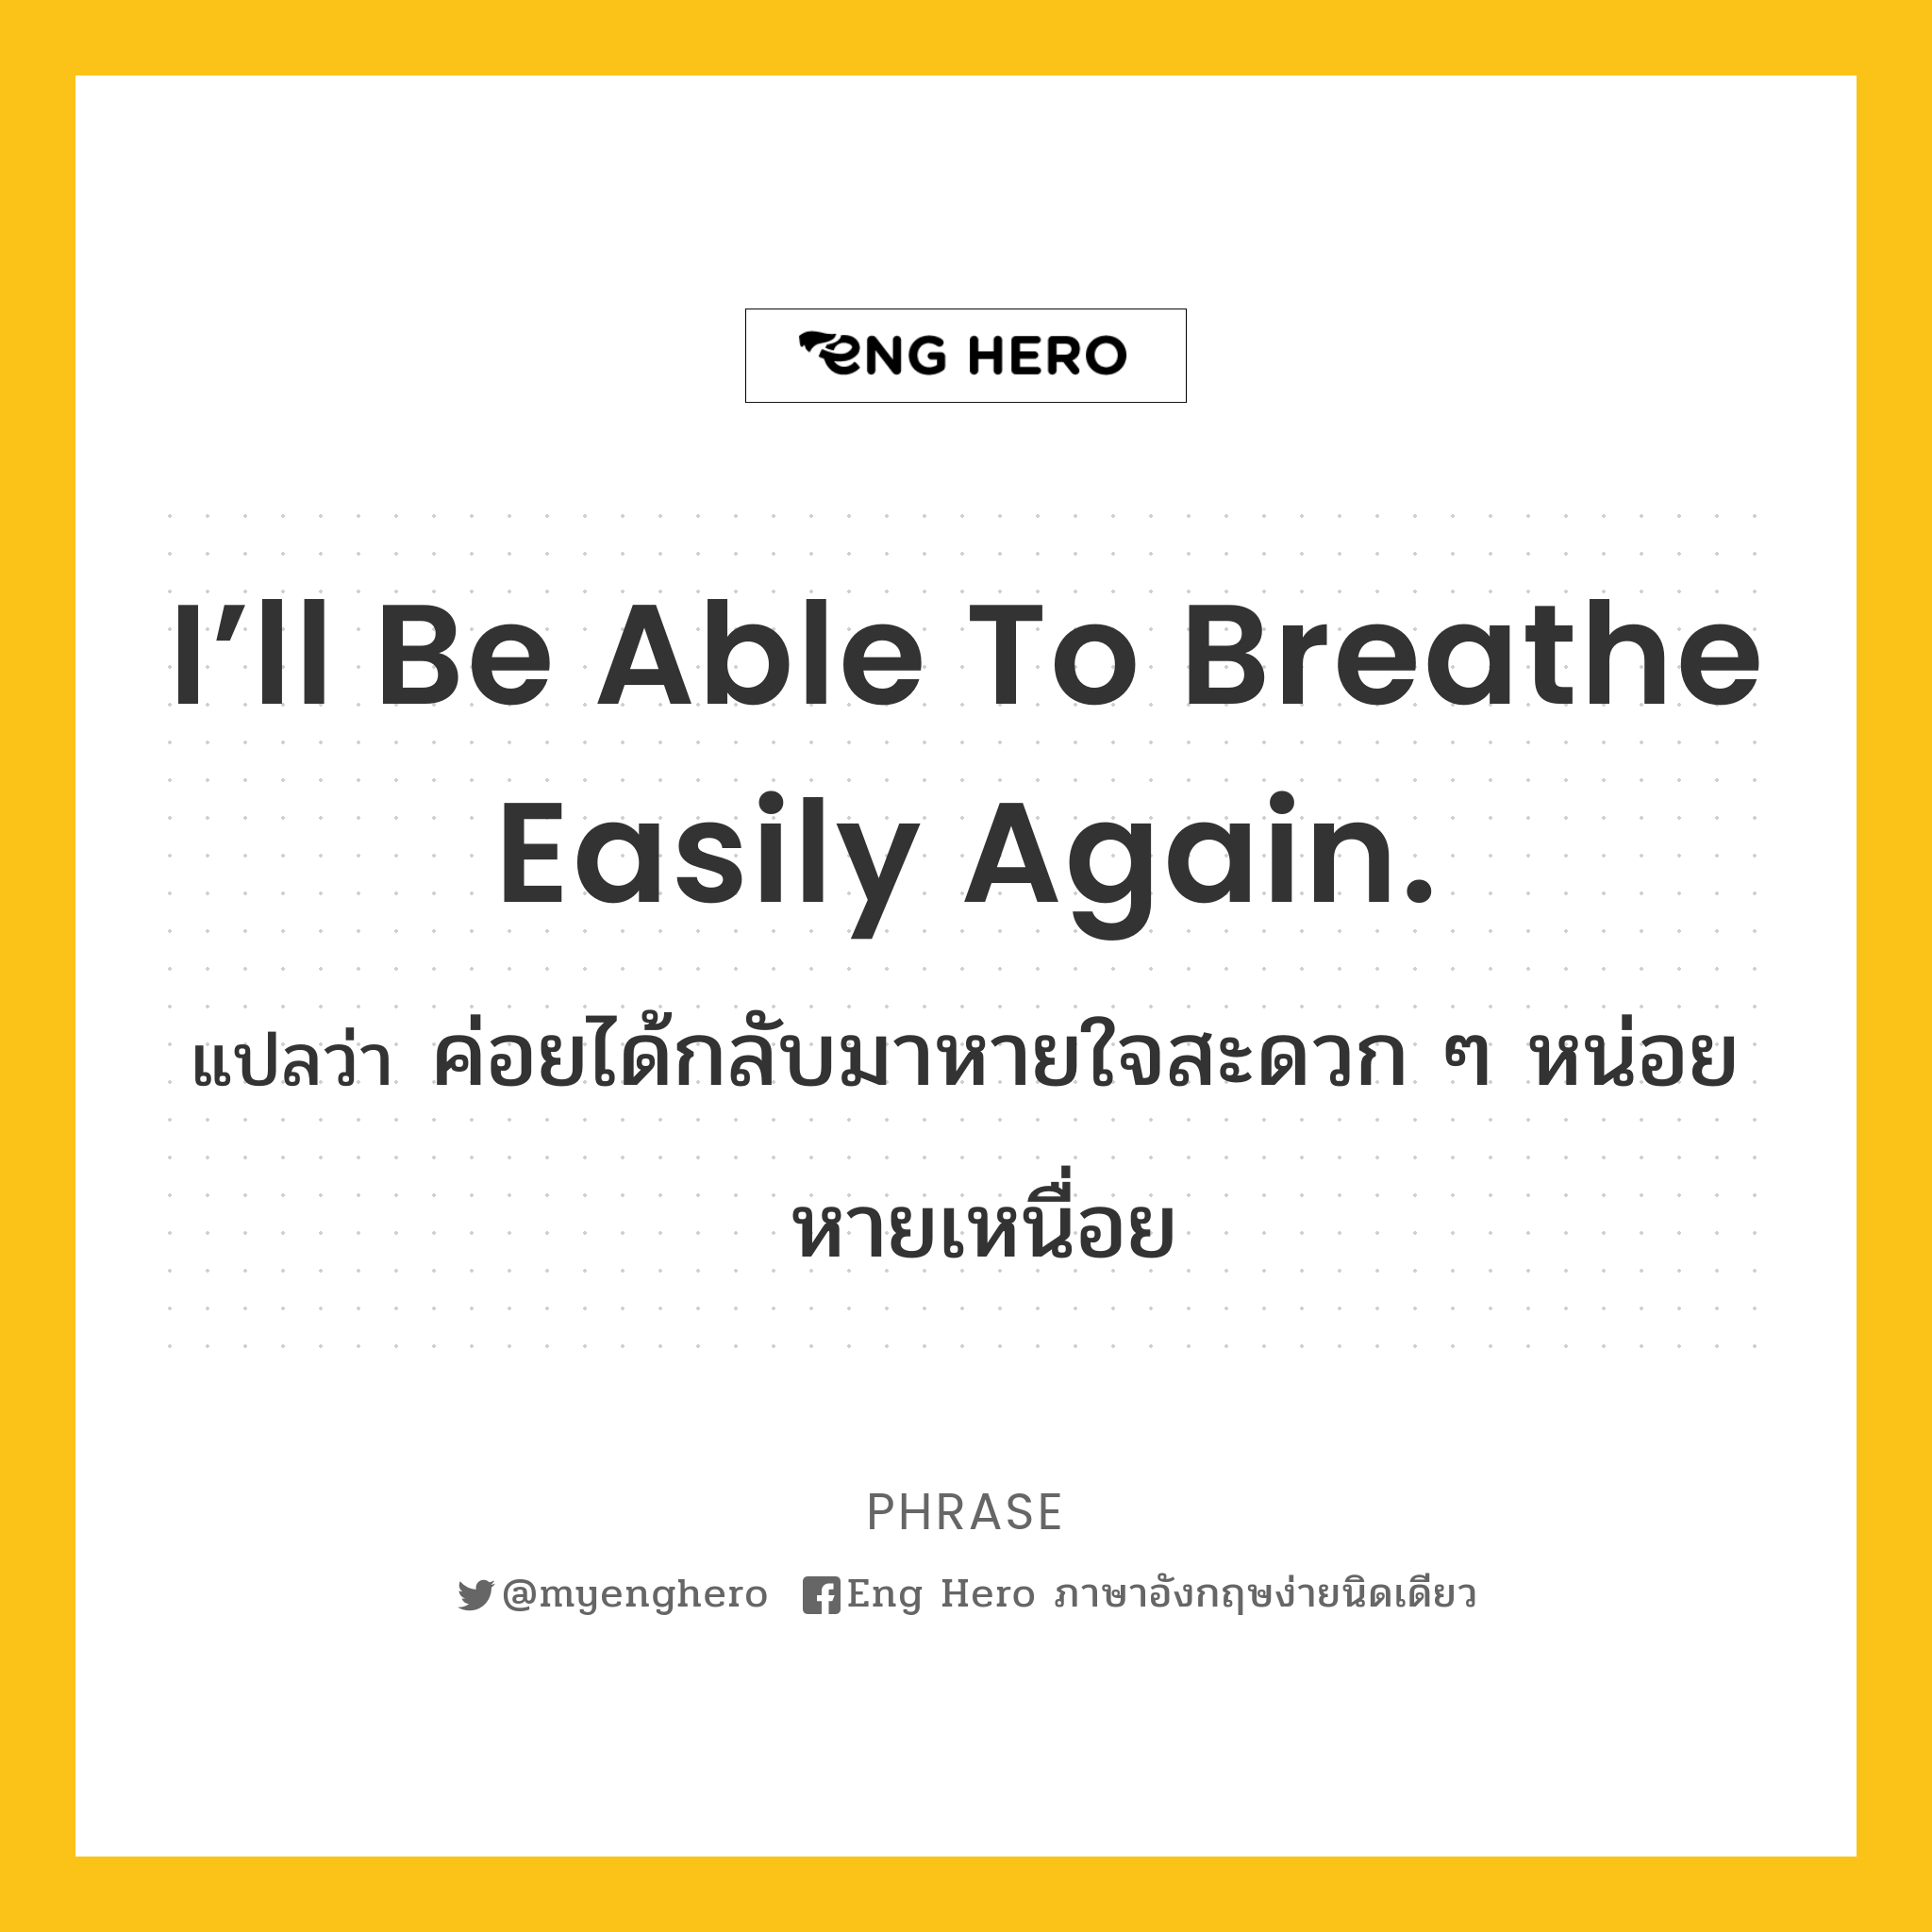 I’ll be able to breathe easily again.